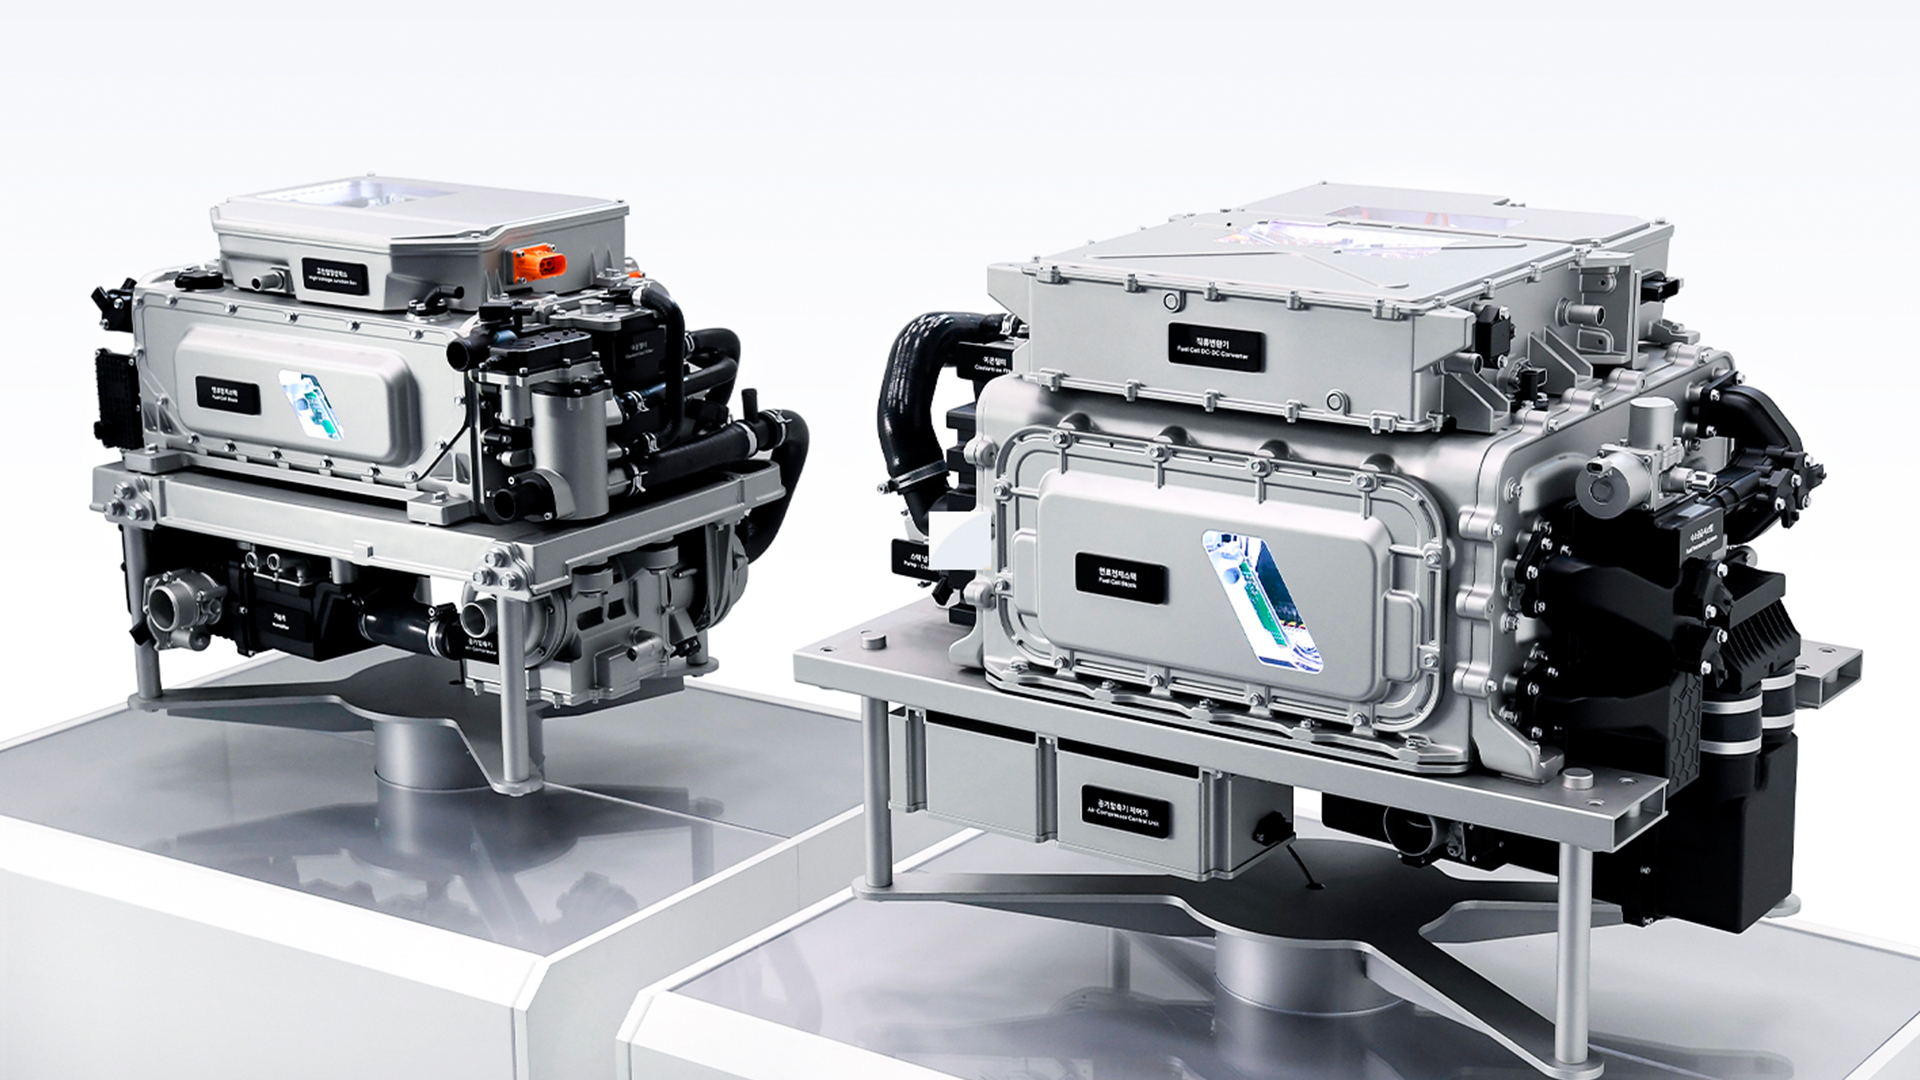 Hyundai Motor Group's Next Generation Fuel Cell System